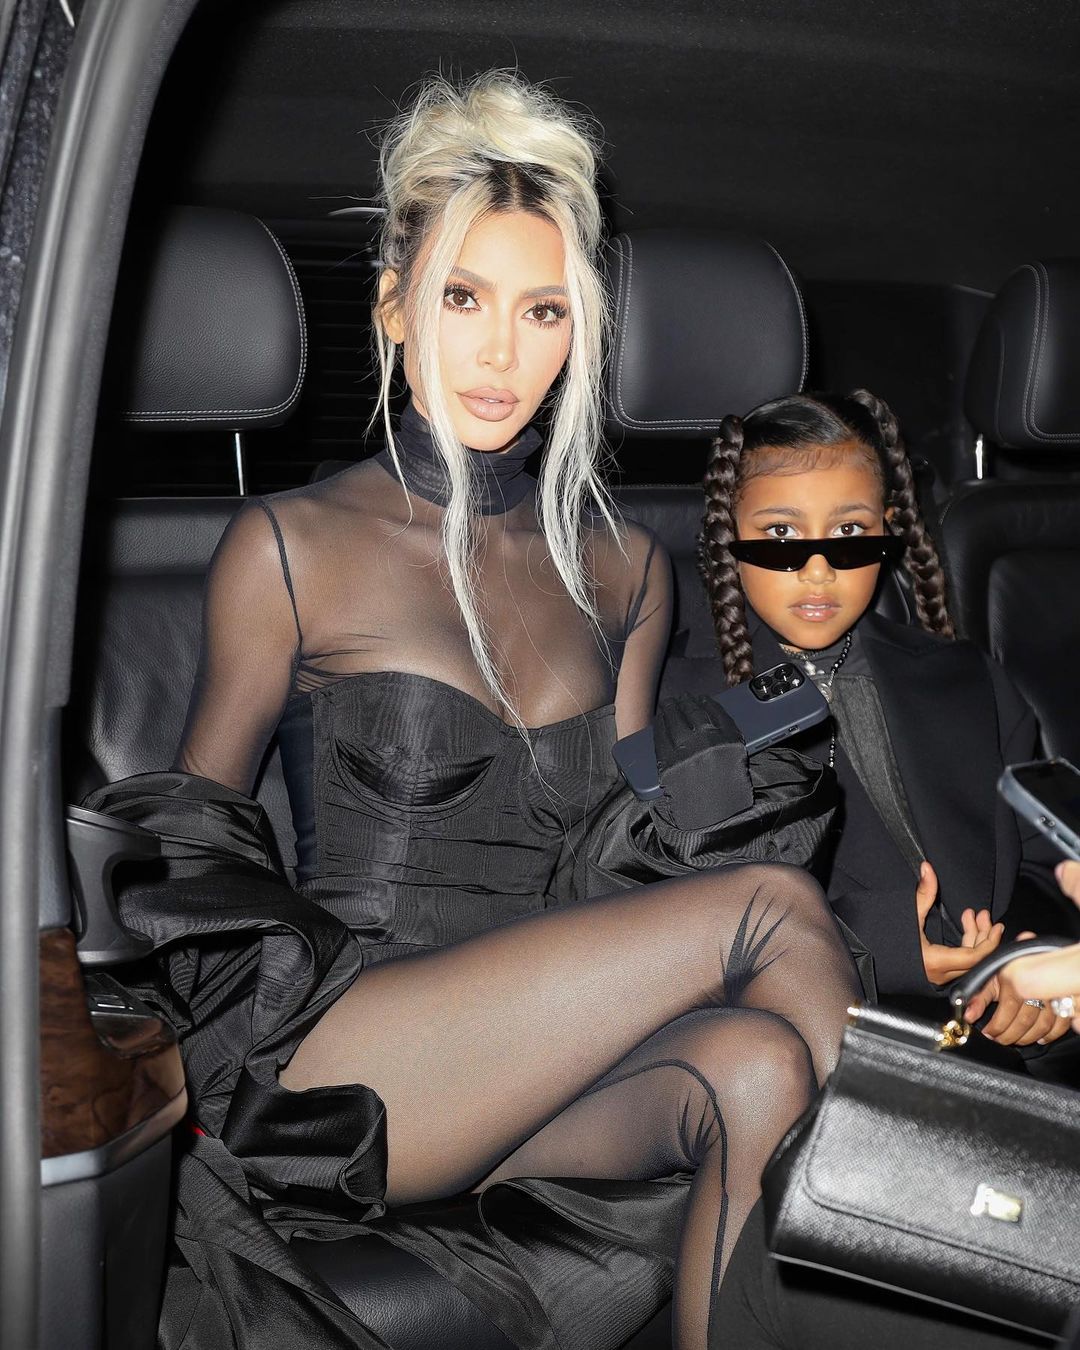 Kim Kardashian and North West Get Festive With Singalong